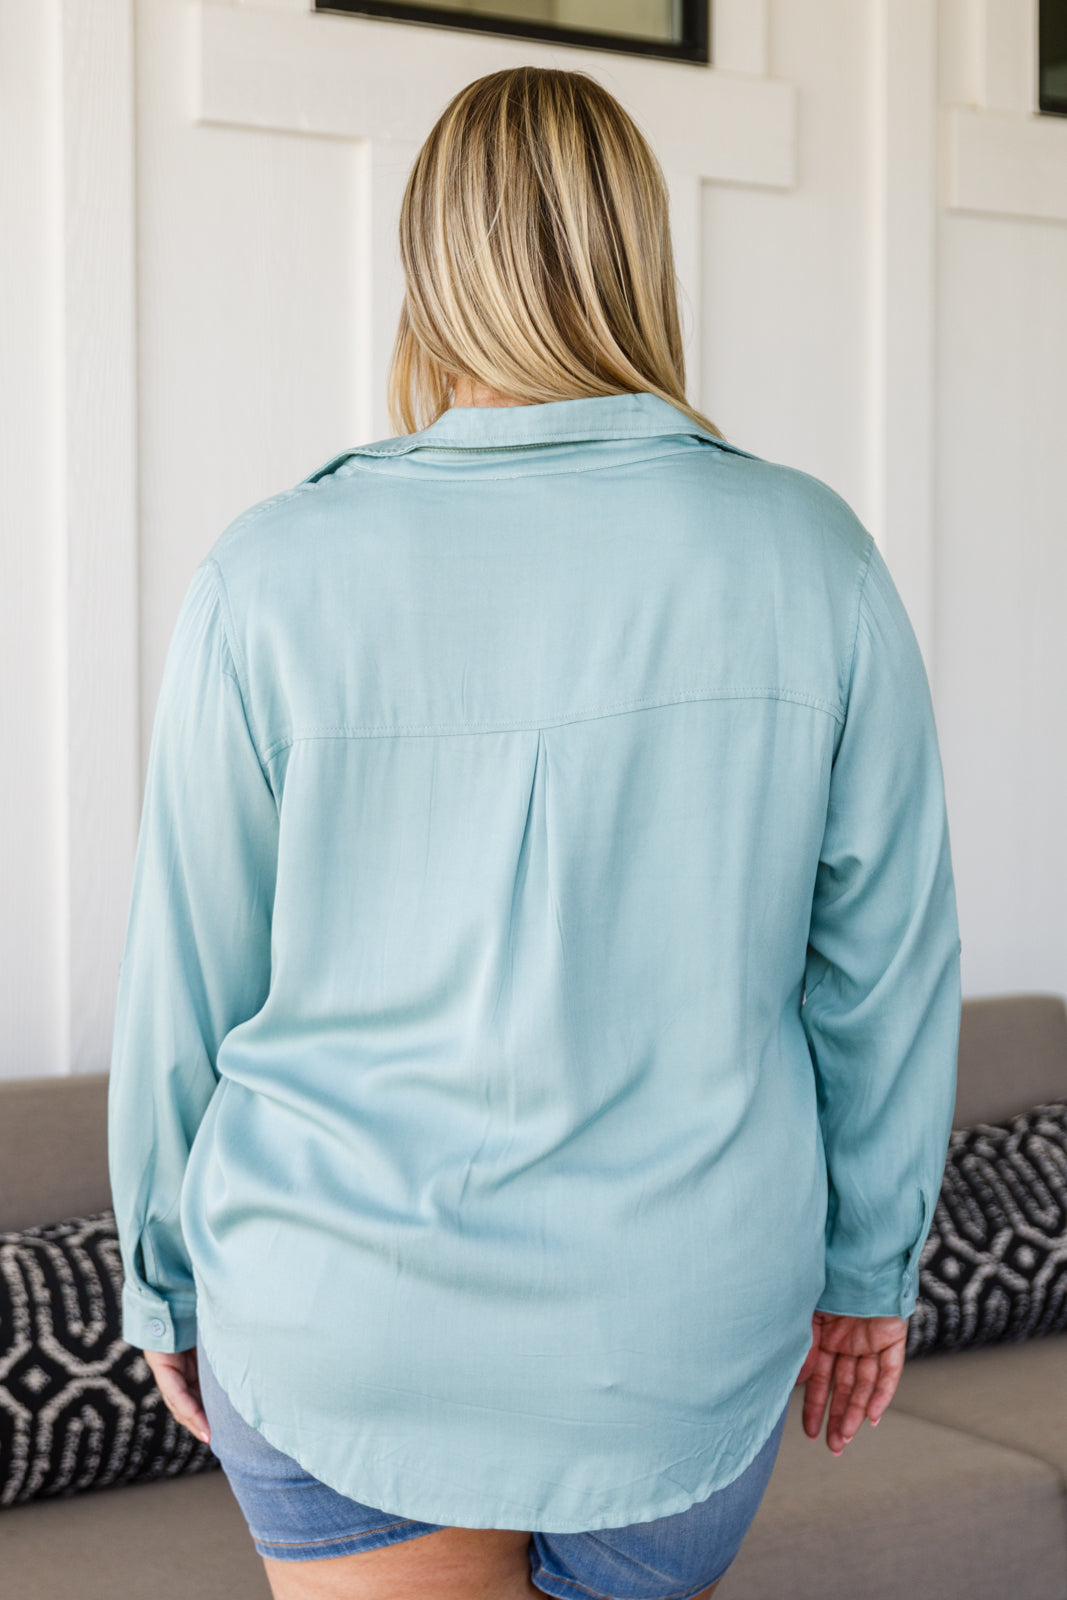 Unwavering Confidence Blouse in Light Blue-Womens-Graceful & Chic Boutique, Family Clothing Store in Waxahachie, Texas